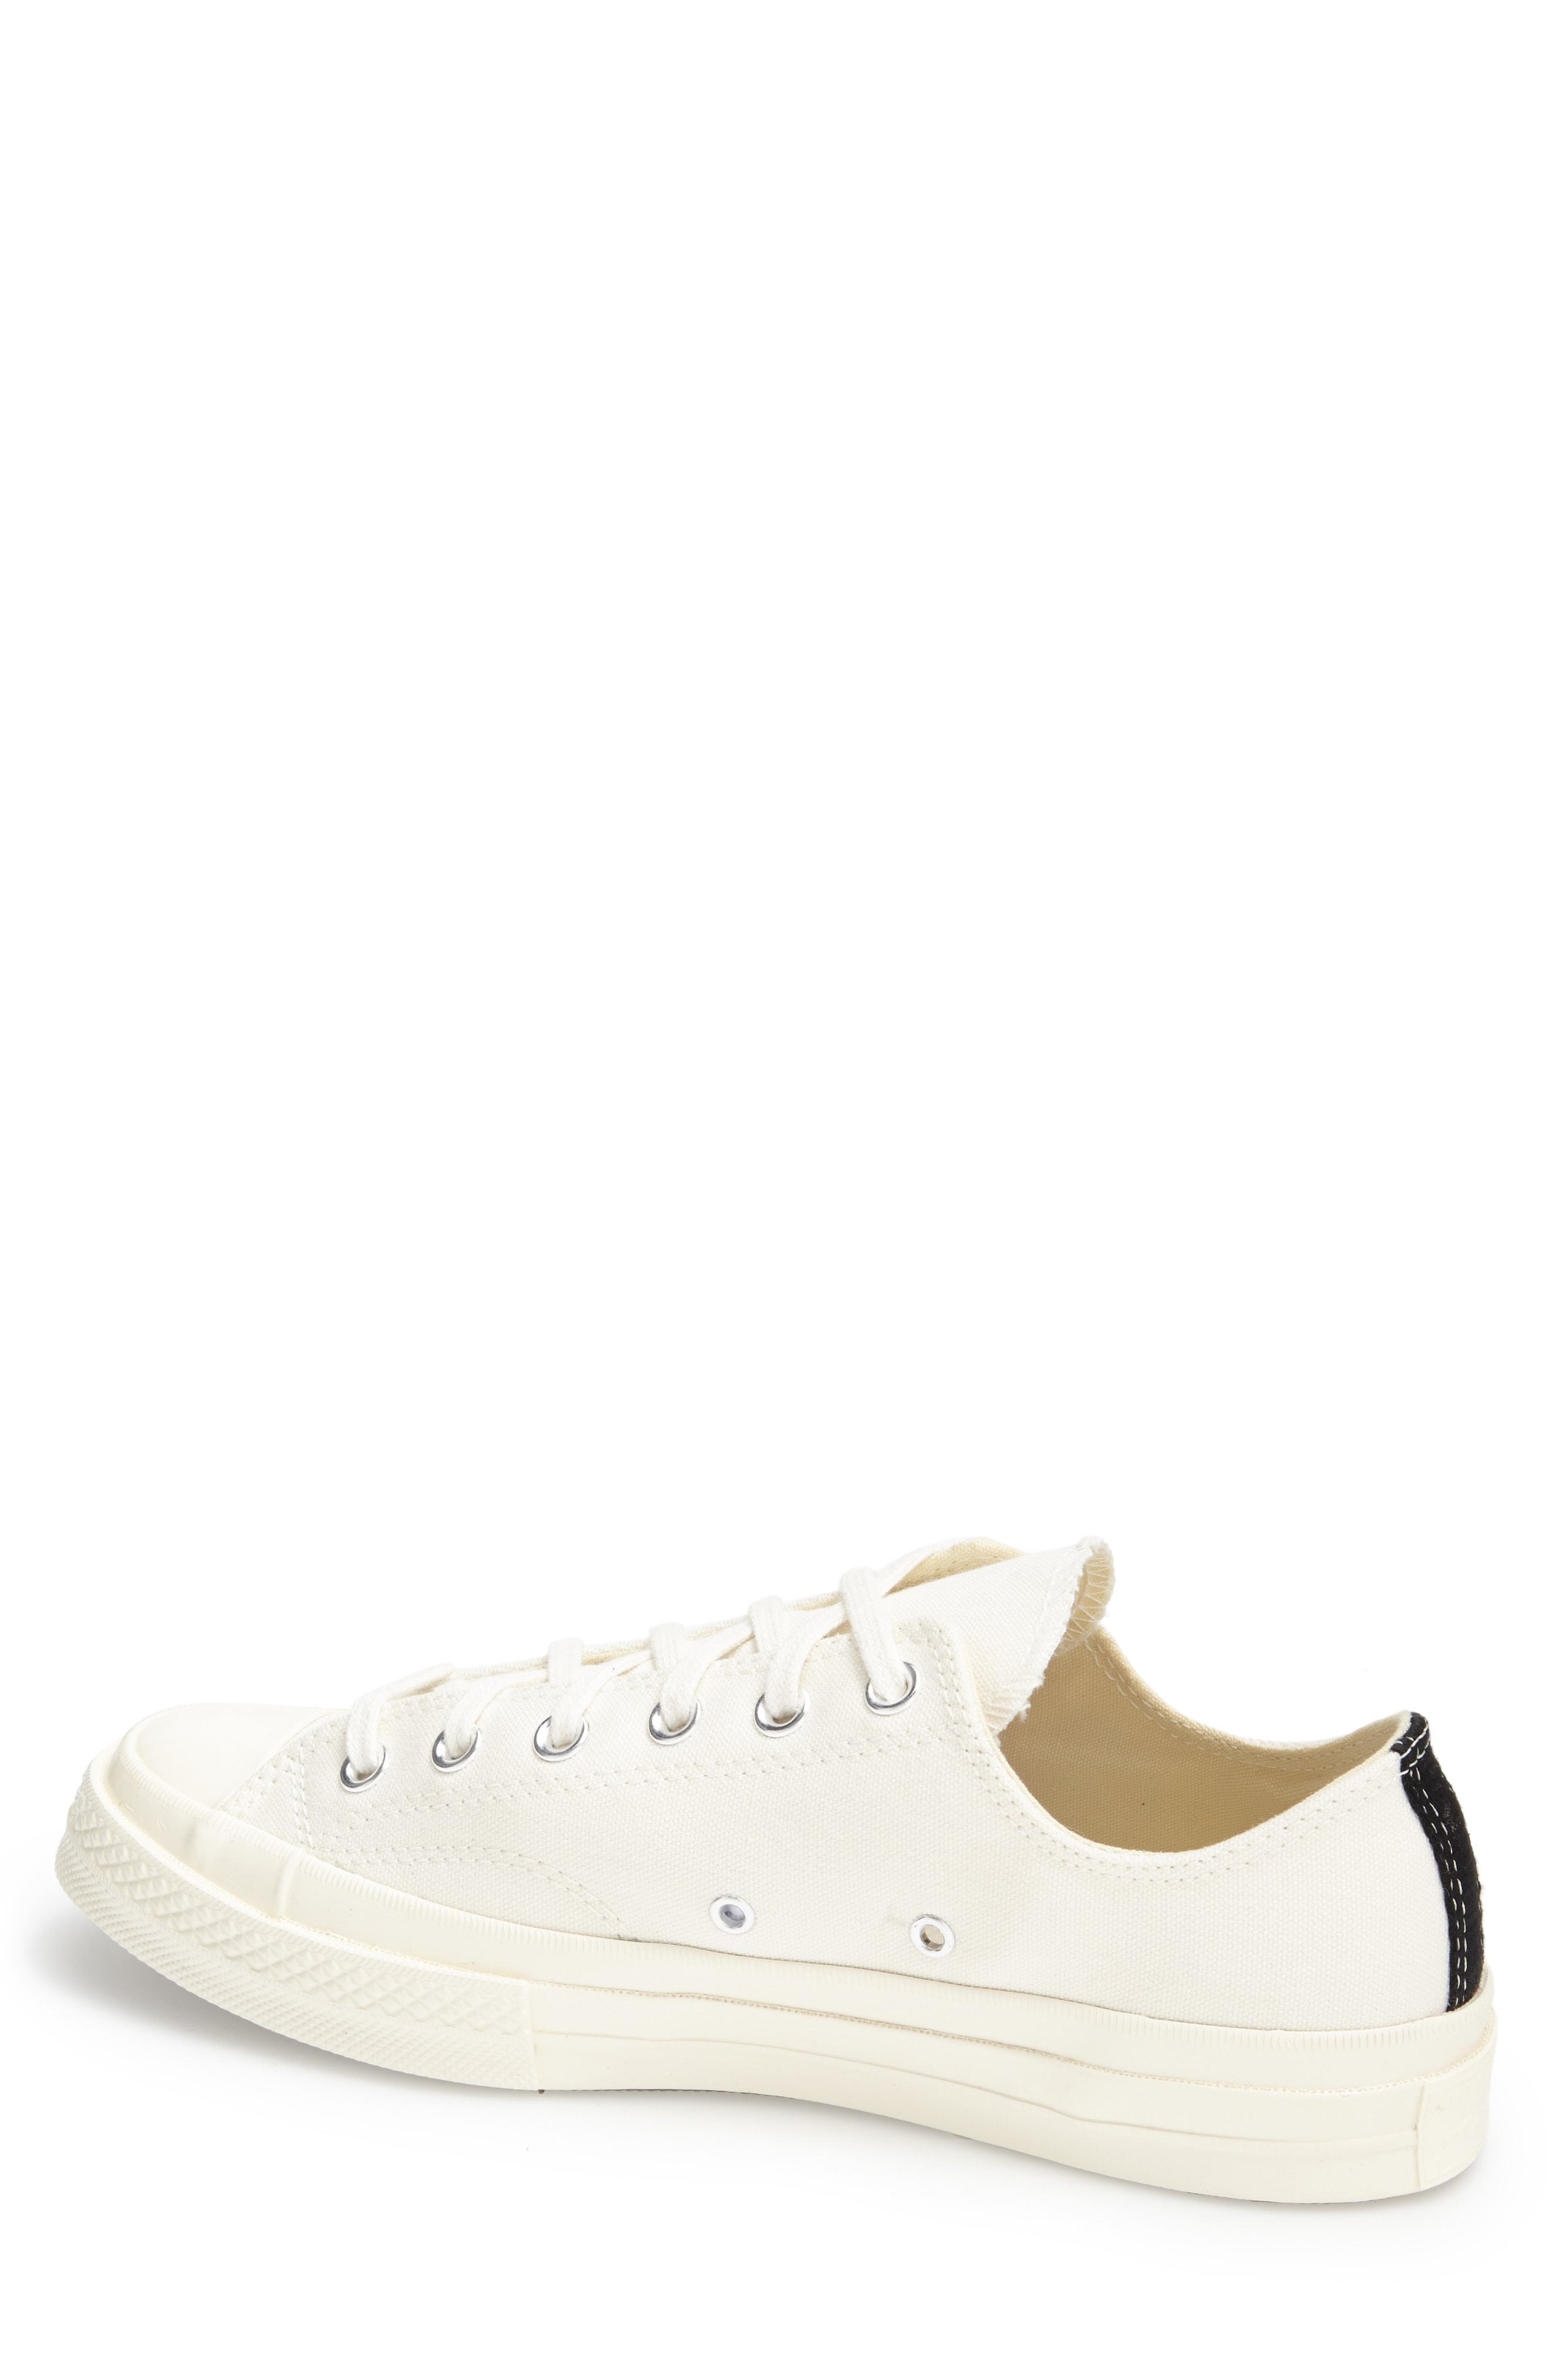 Comme des Garcons Play Converse Chuck Taylor Heart Low Sneaker, $150 | Nordstrom | Lookastic